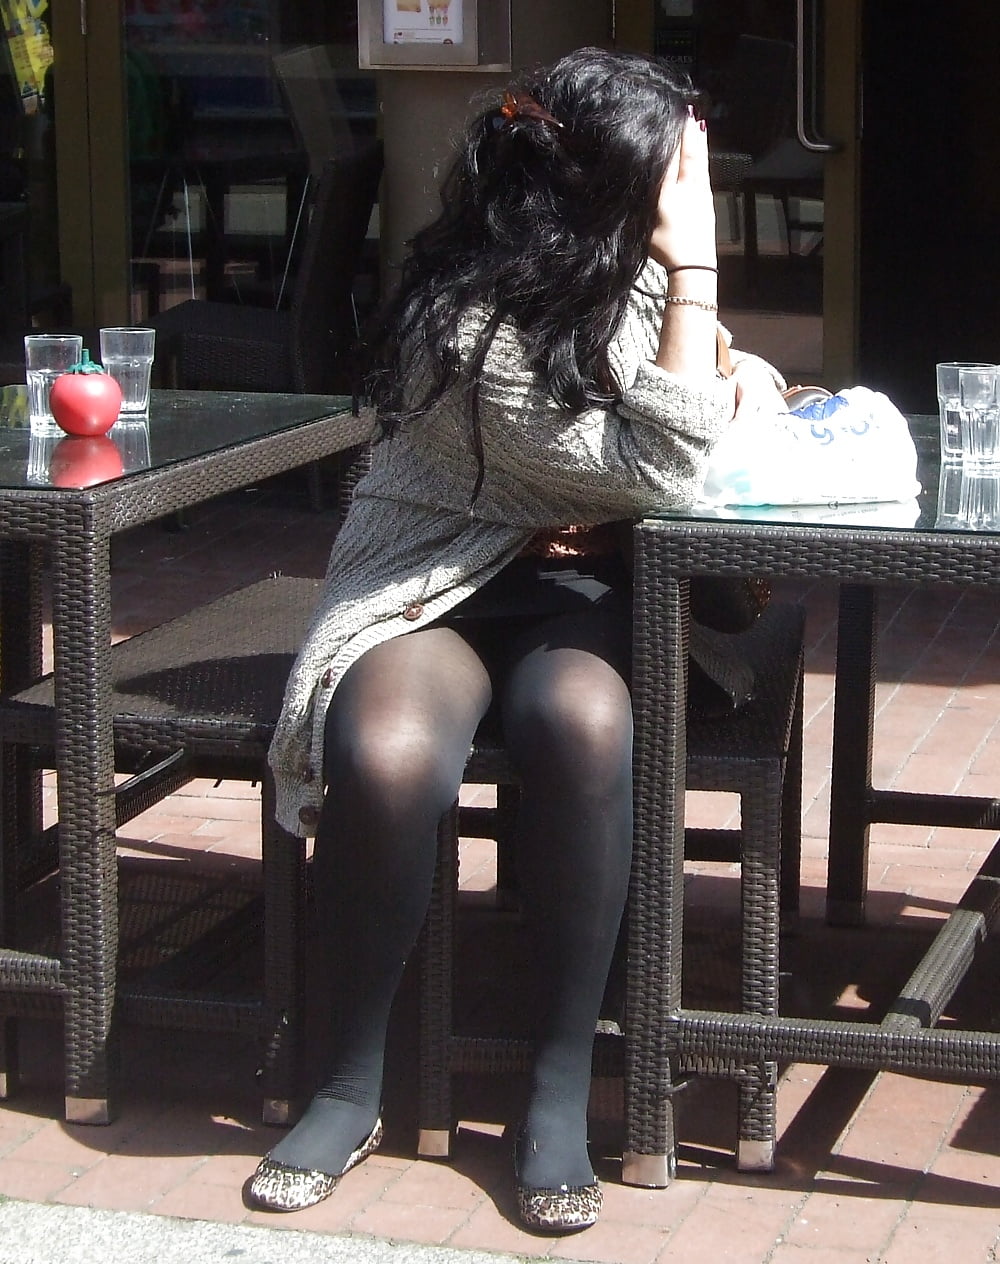 Candid Tights Pantyhose Stockings In Public 3 258 Pics